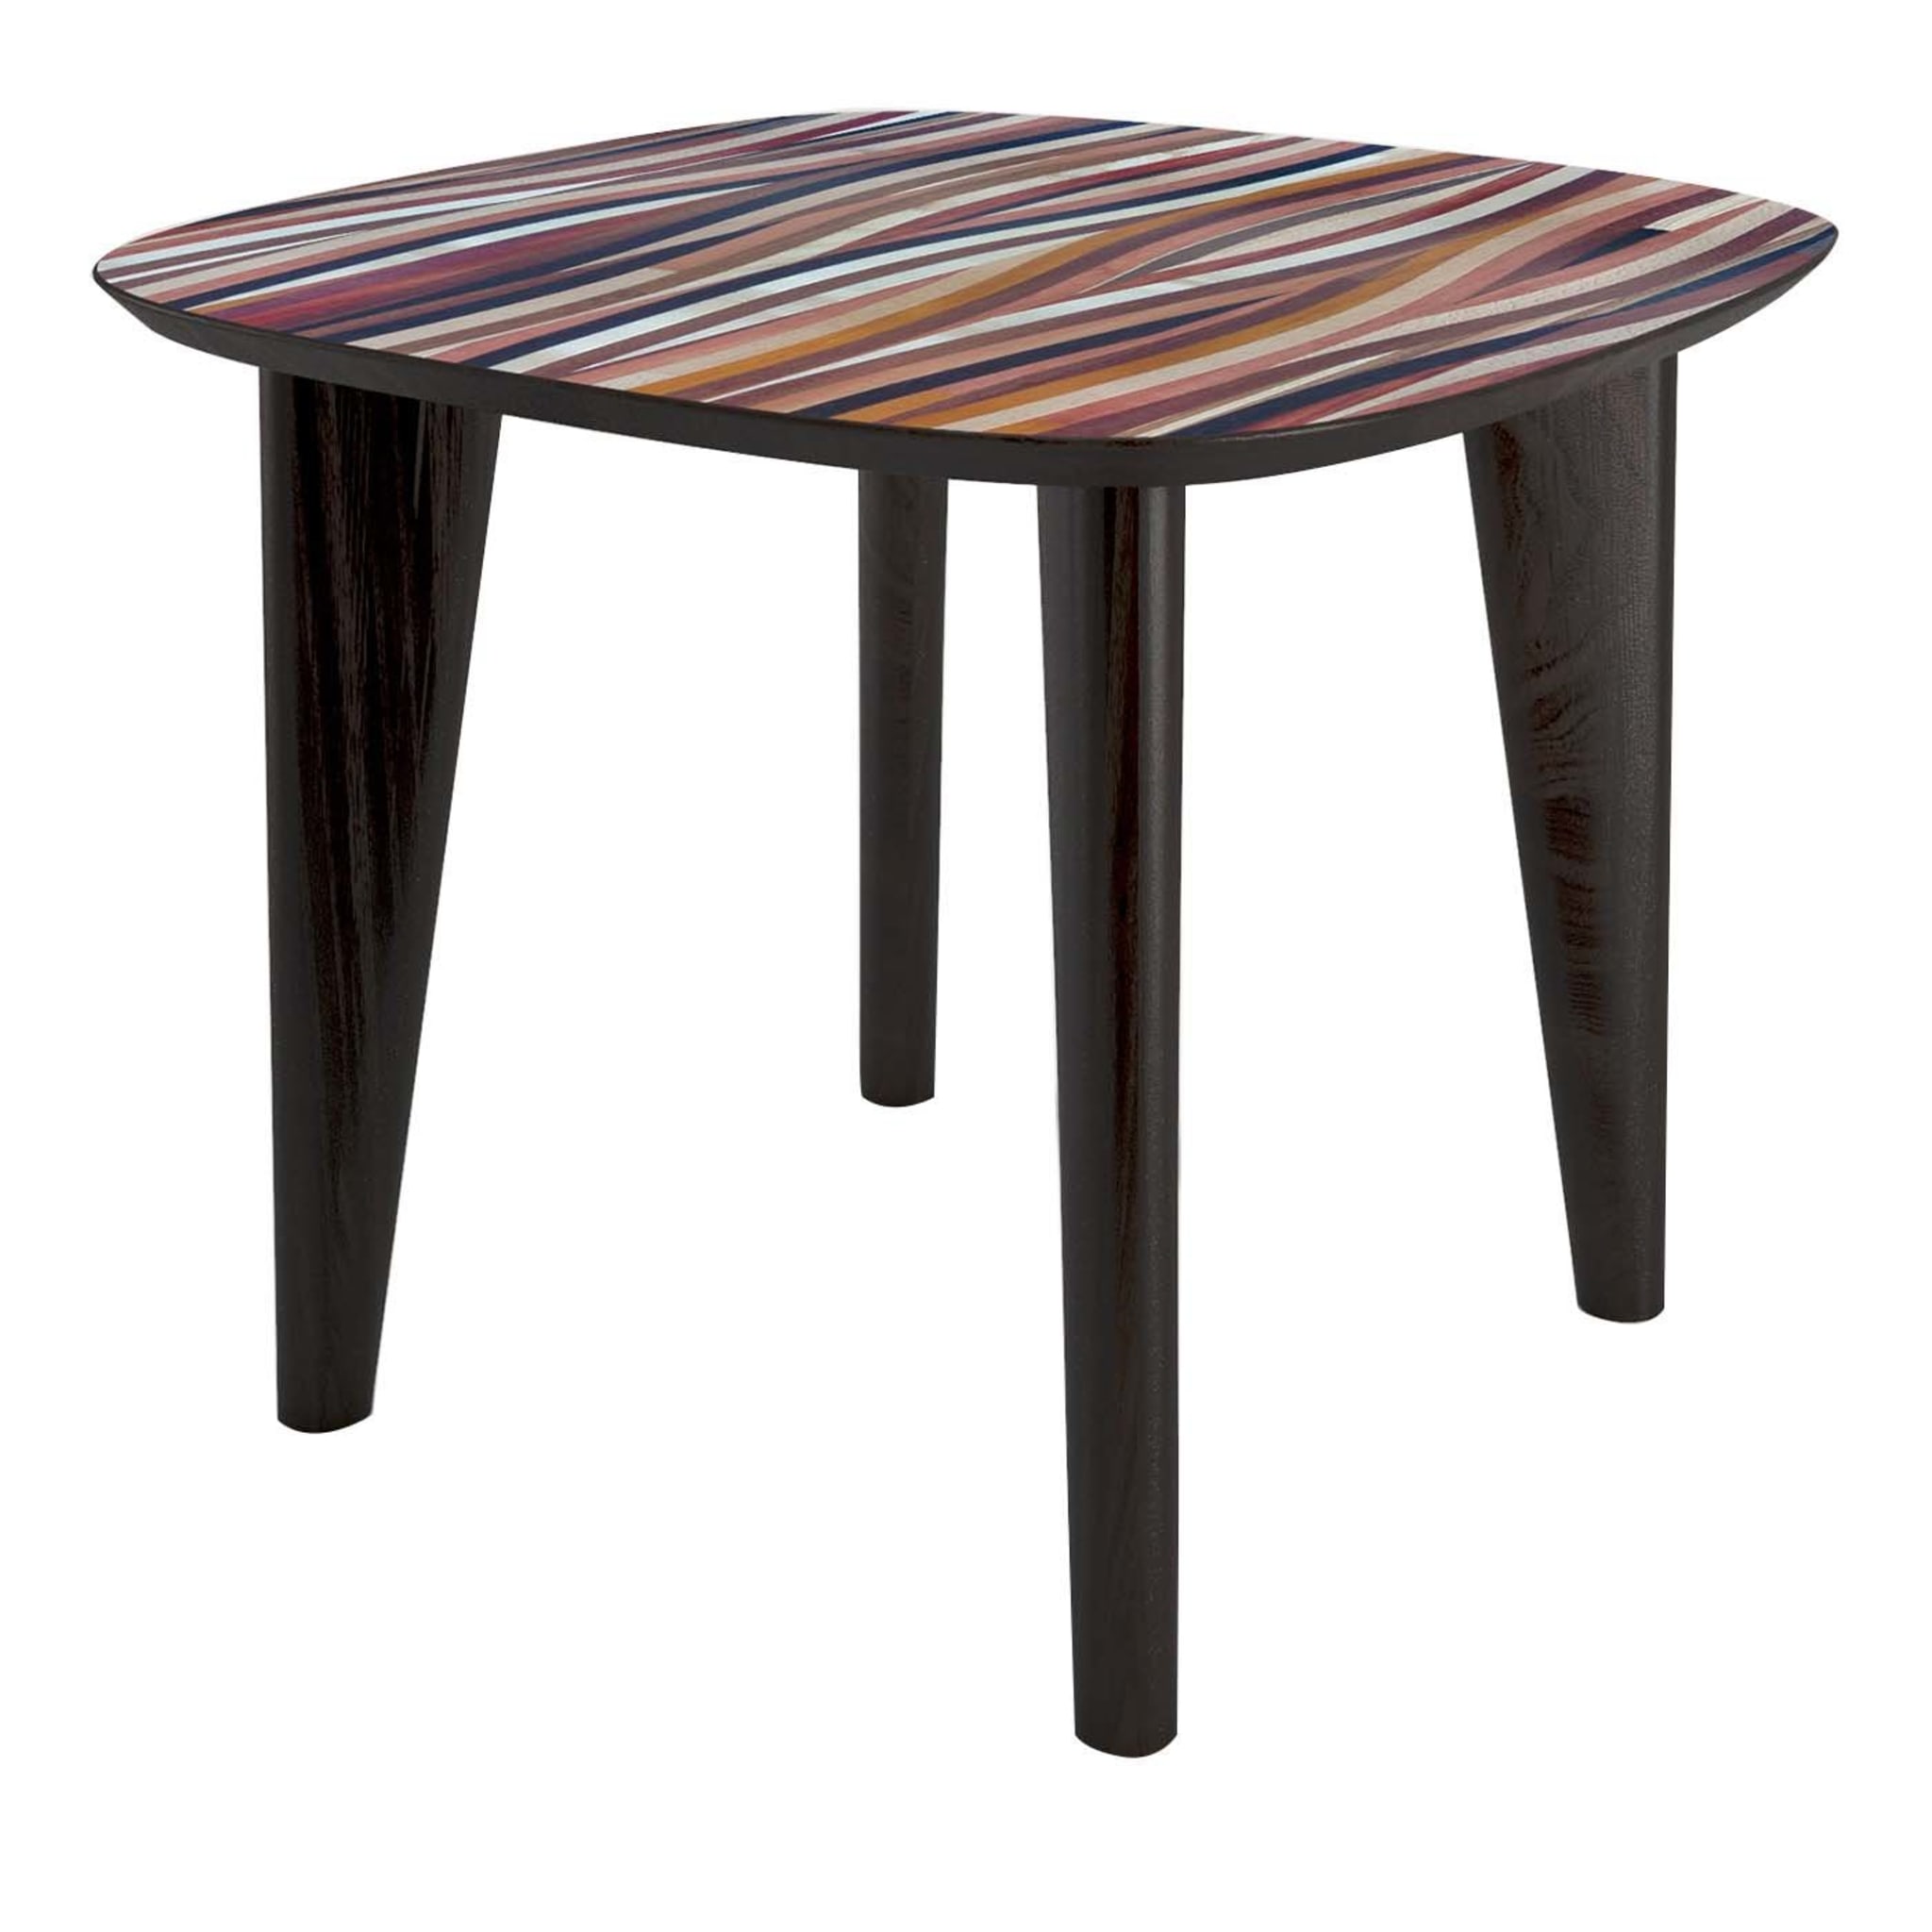 Multiessenza Square Bistro Table by Gabriele E. M. D'Angelo - Main view